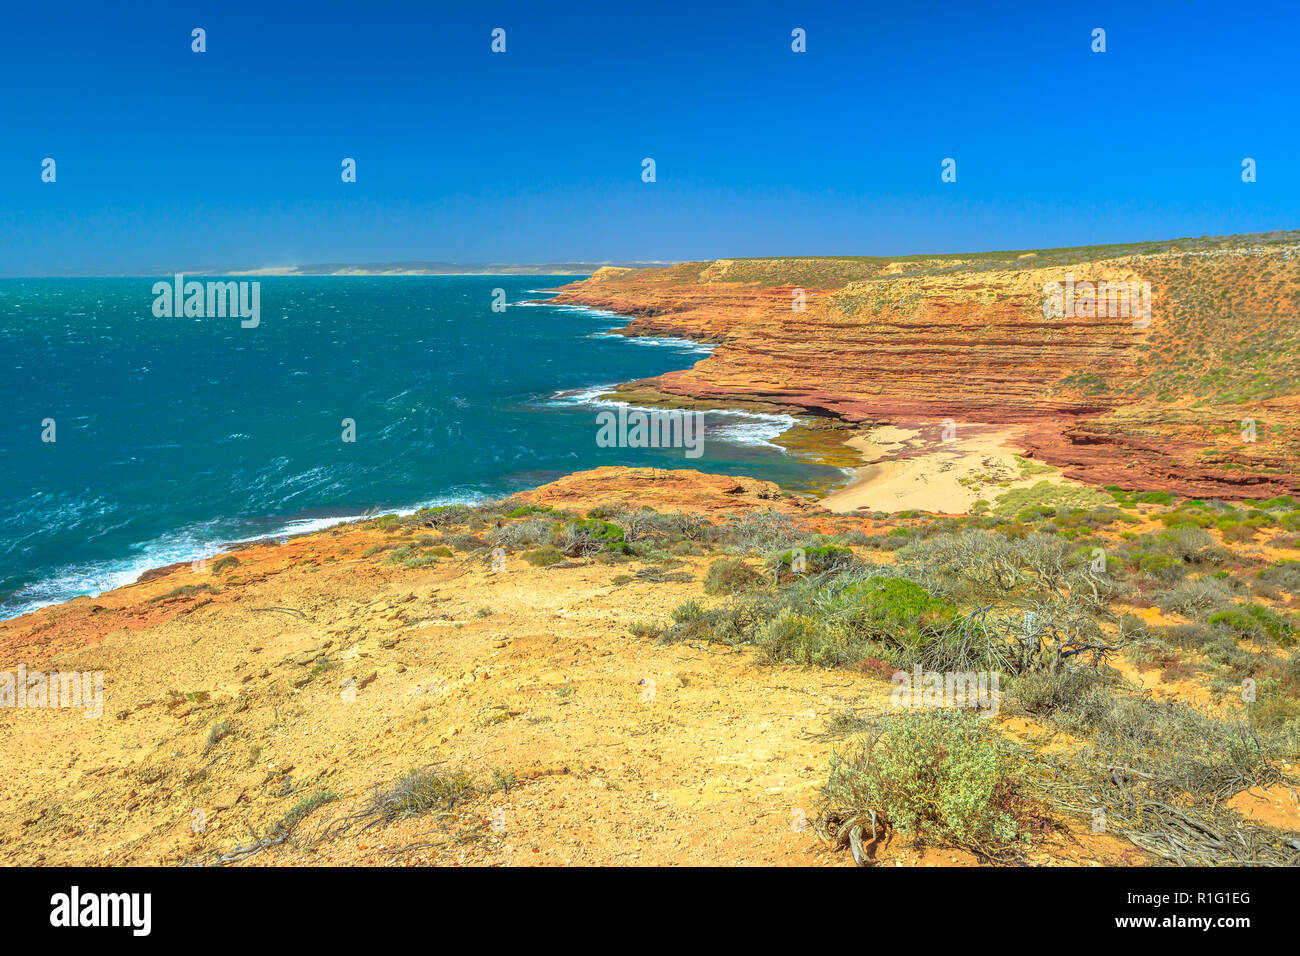 Aerial view of Pot Alley from Eagle Gorge Lookout in Kalbarri National Park, Western Australia. The ocean gorge shows spectacular ocean scenery amidst the rugged gorges. Coral coast, Indian Ocean. Stock Photo